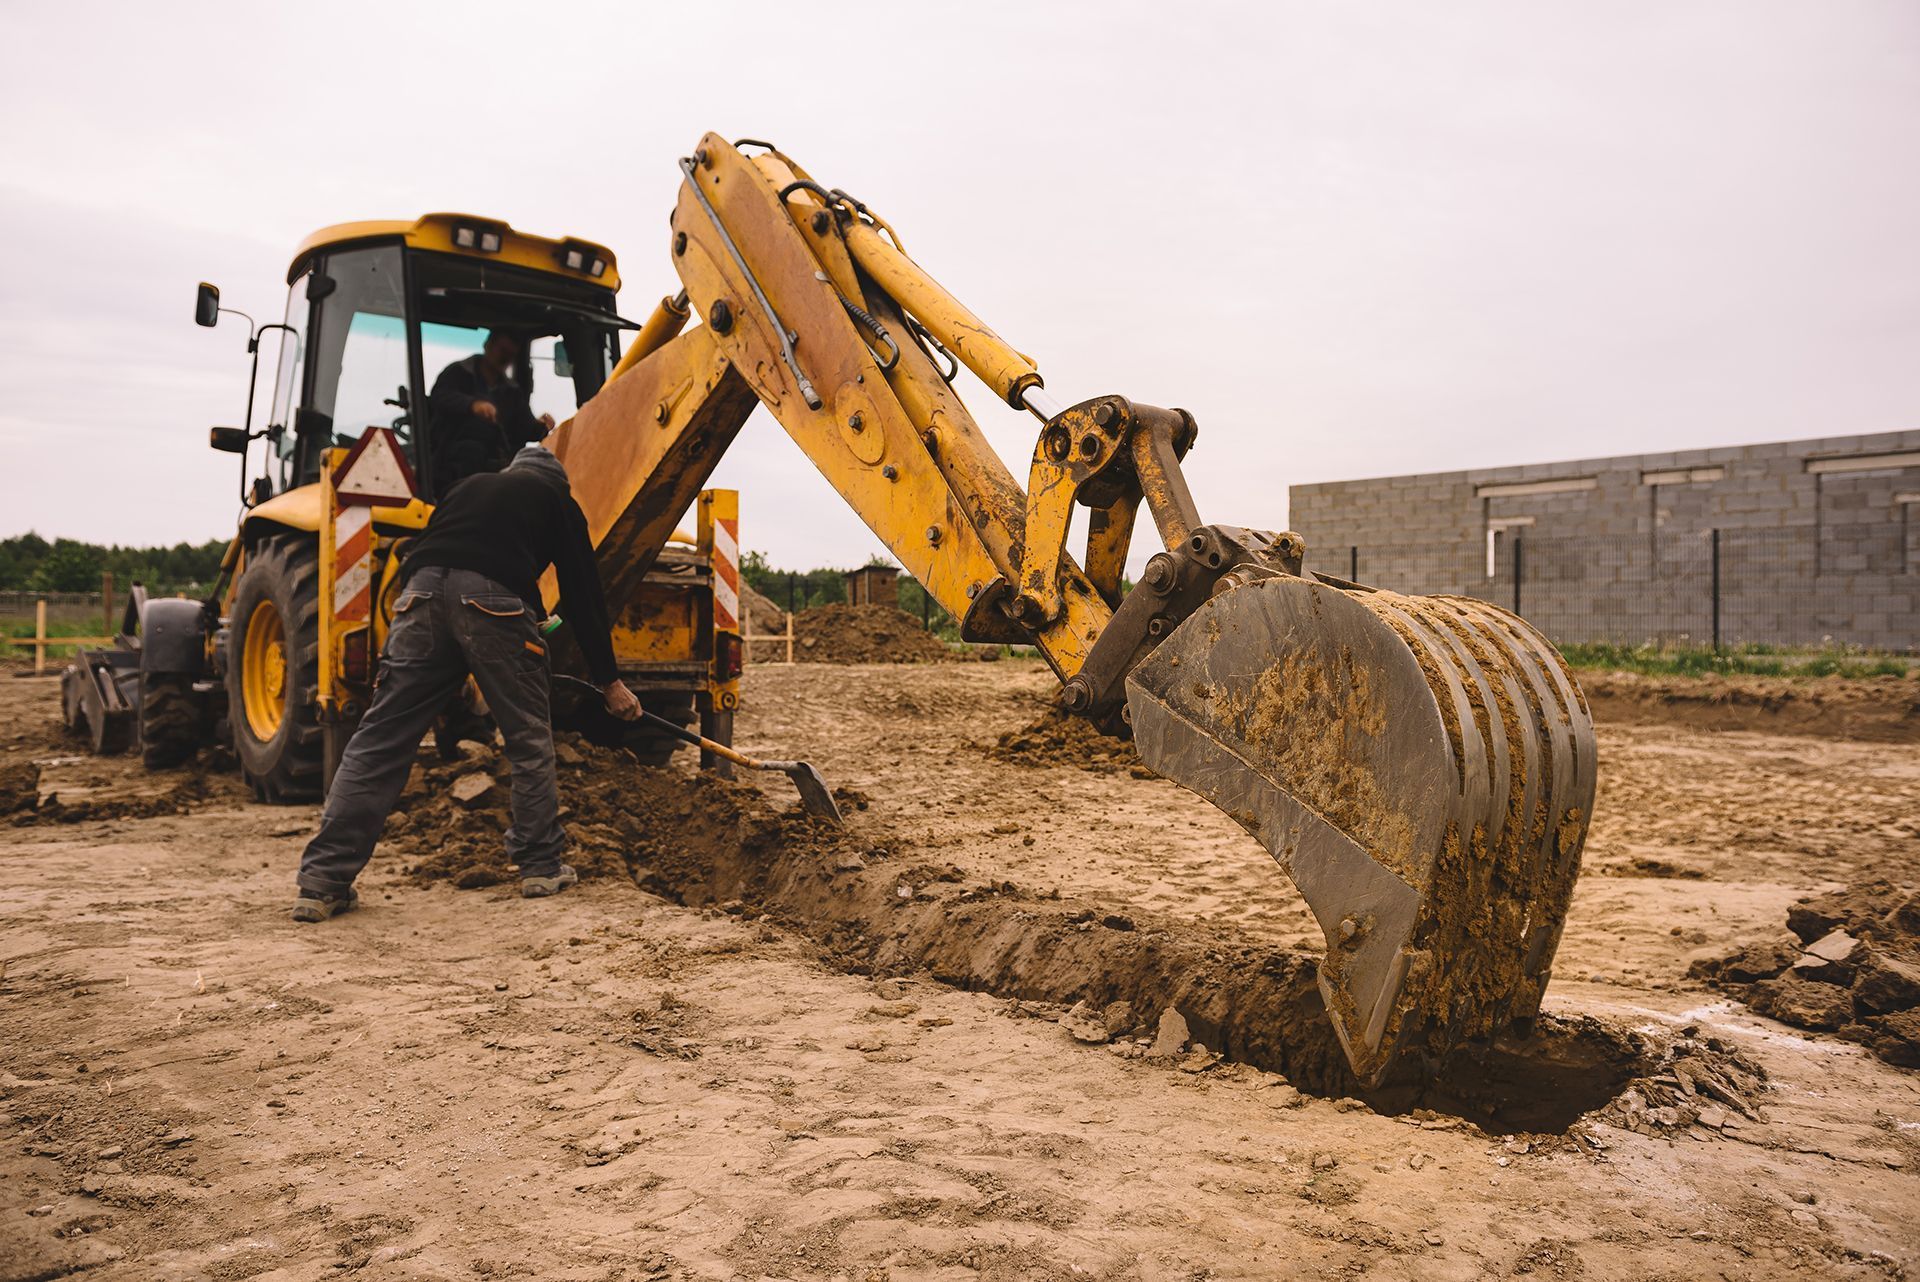 a man digging in the dirt with a yellow excavator in the background